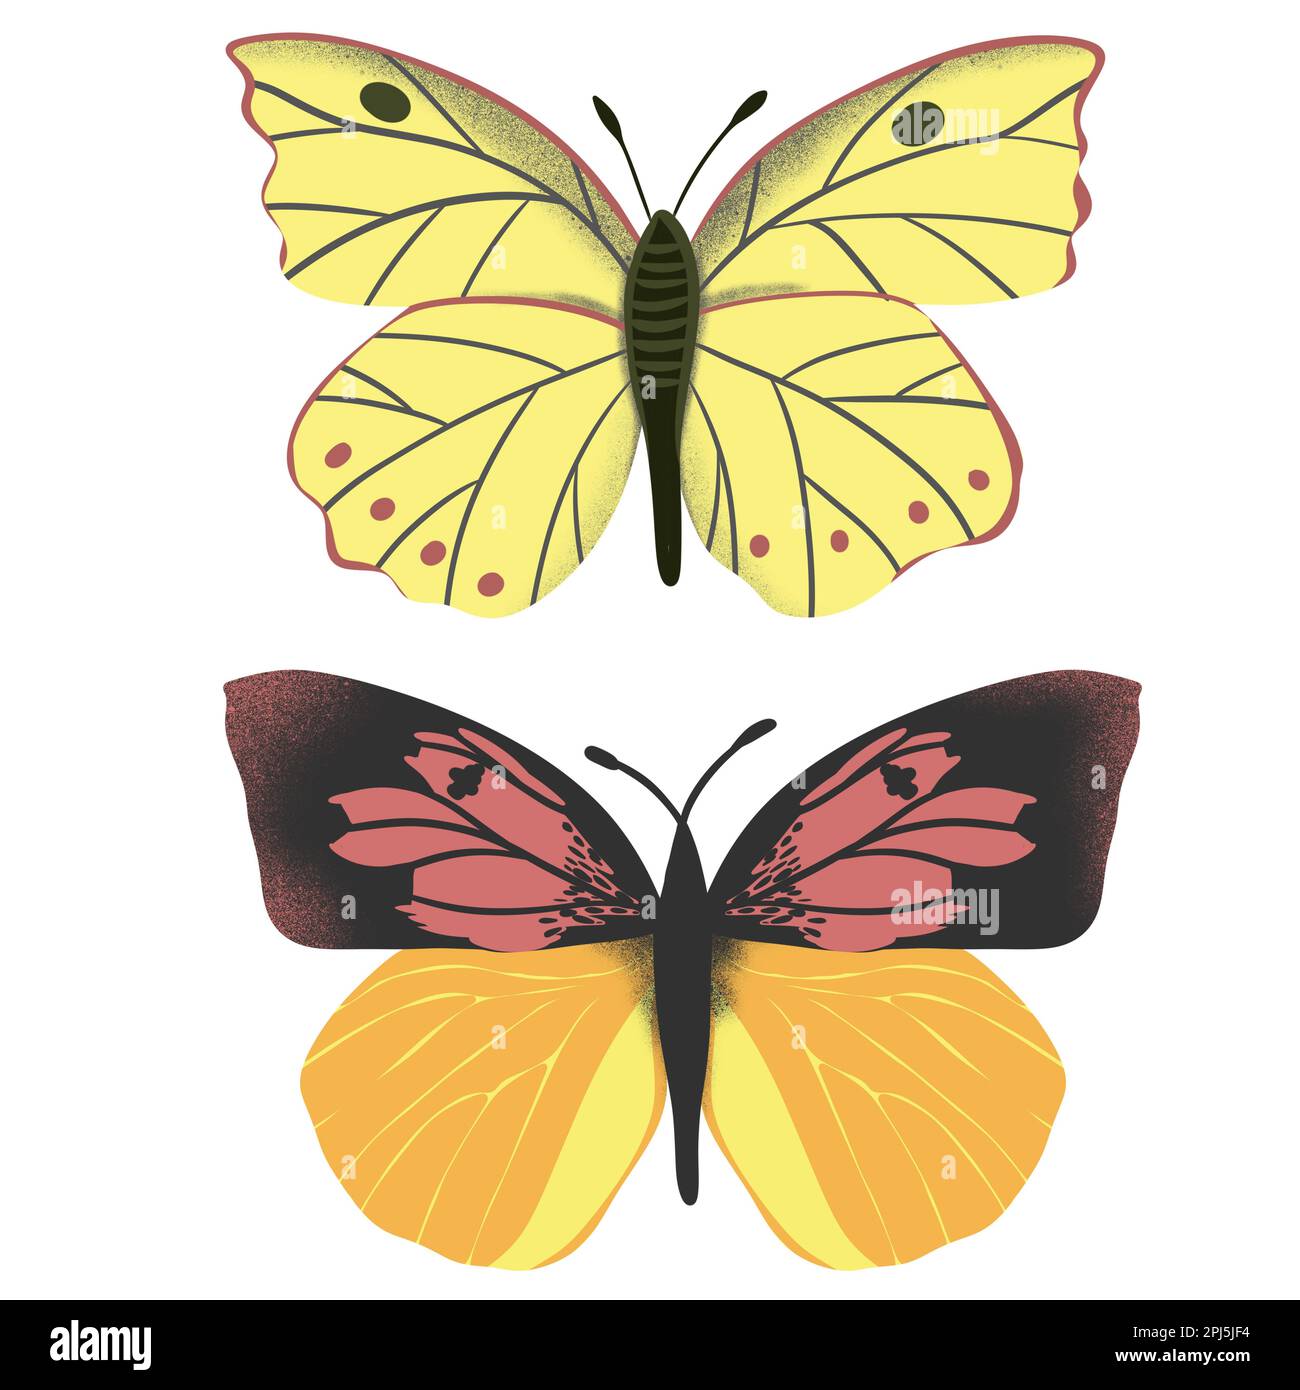 Hand drawn illustration of california dogface butterfly Zerene eurydice, state insect symbol. Biology zoology bug concept, natural meadow forest decor, yellow orange wings with spots, drawing sketch Stock Photo